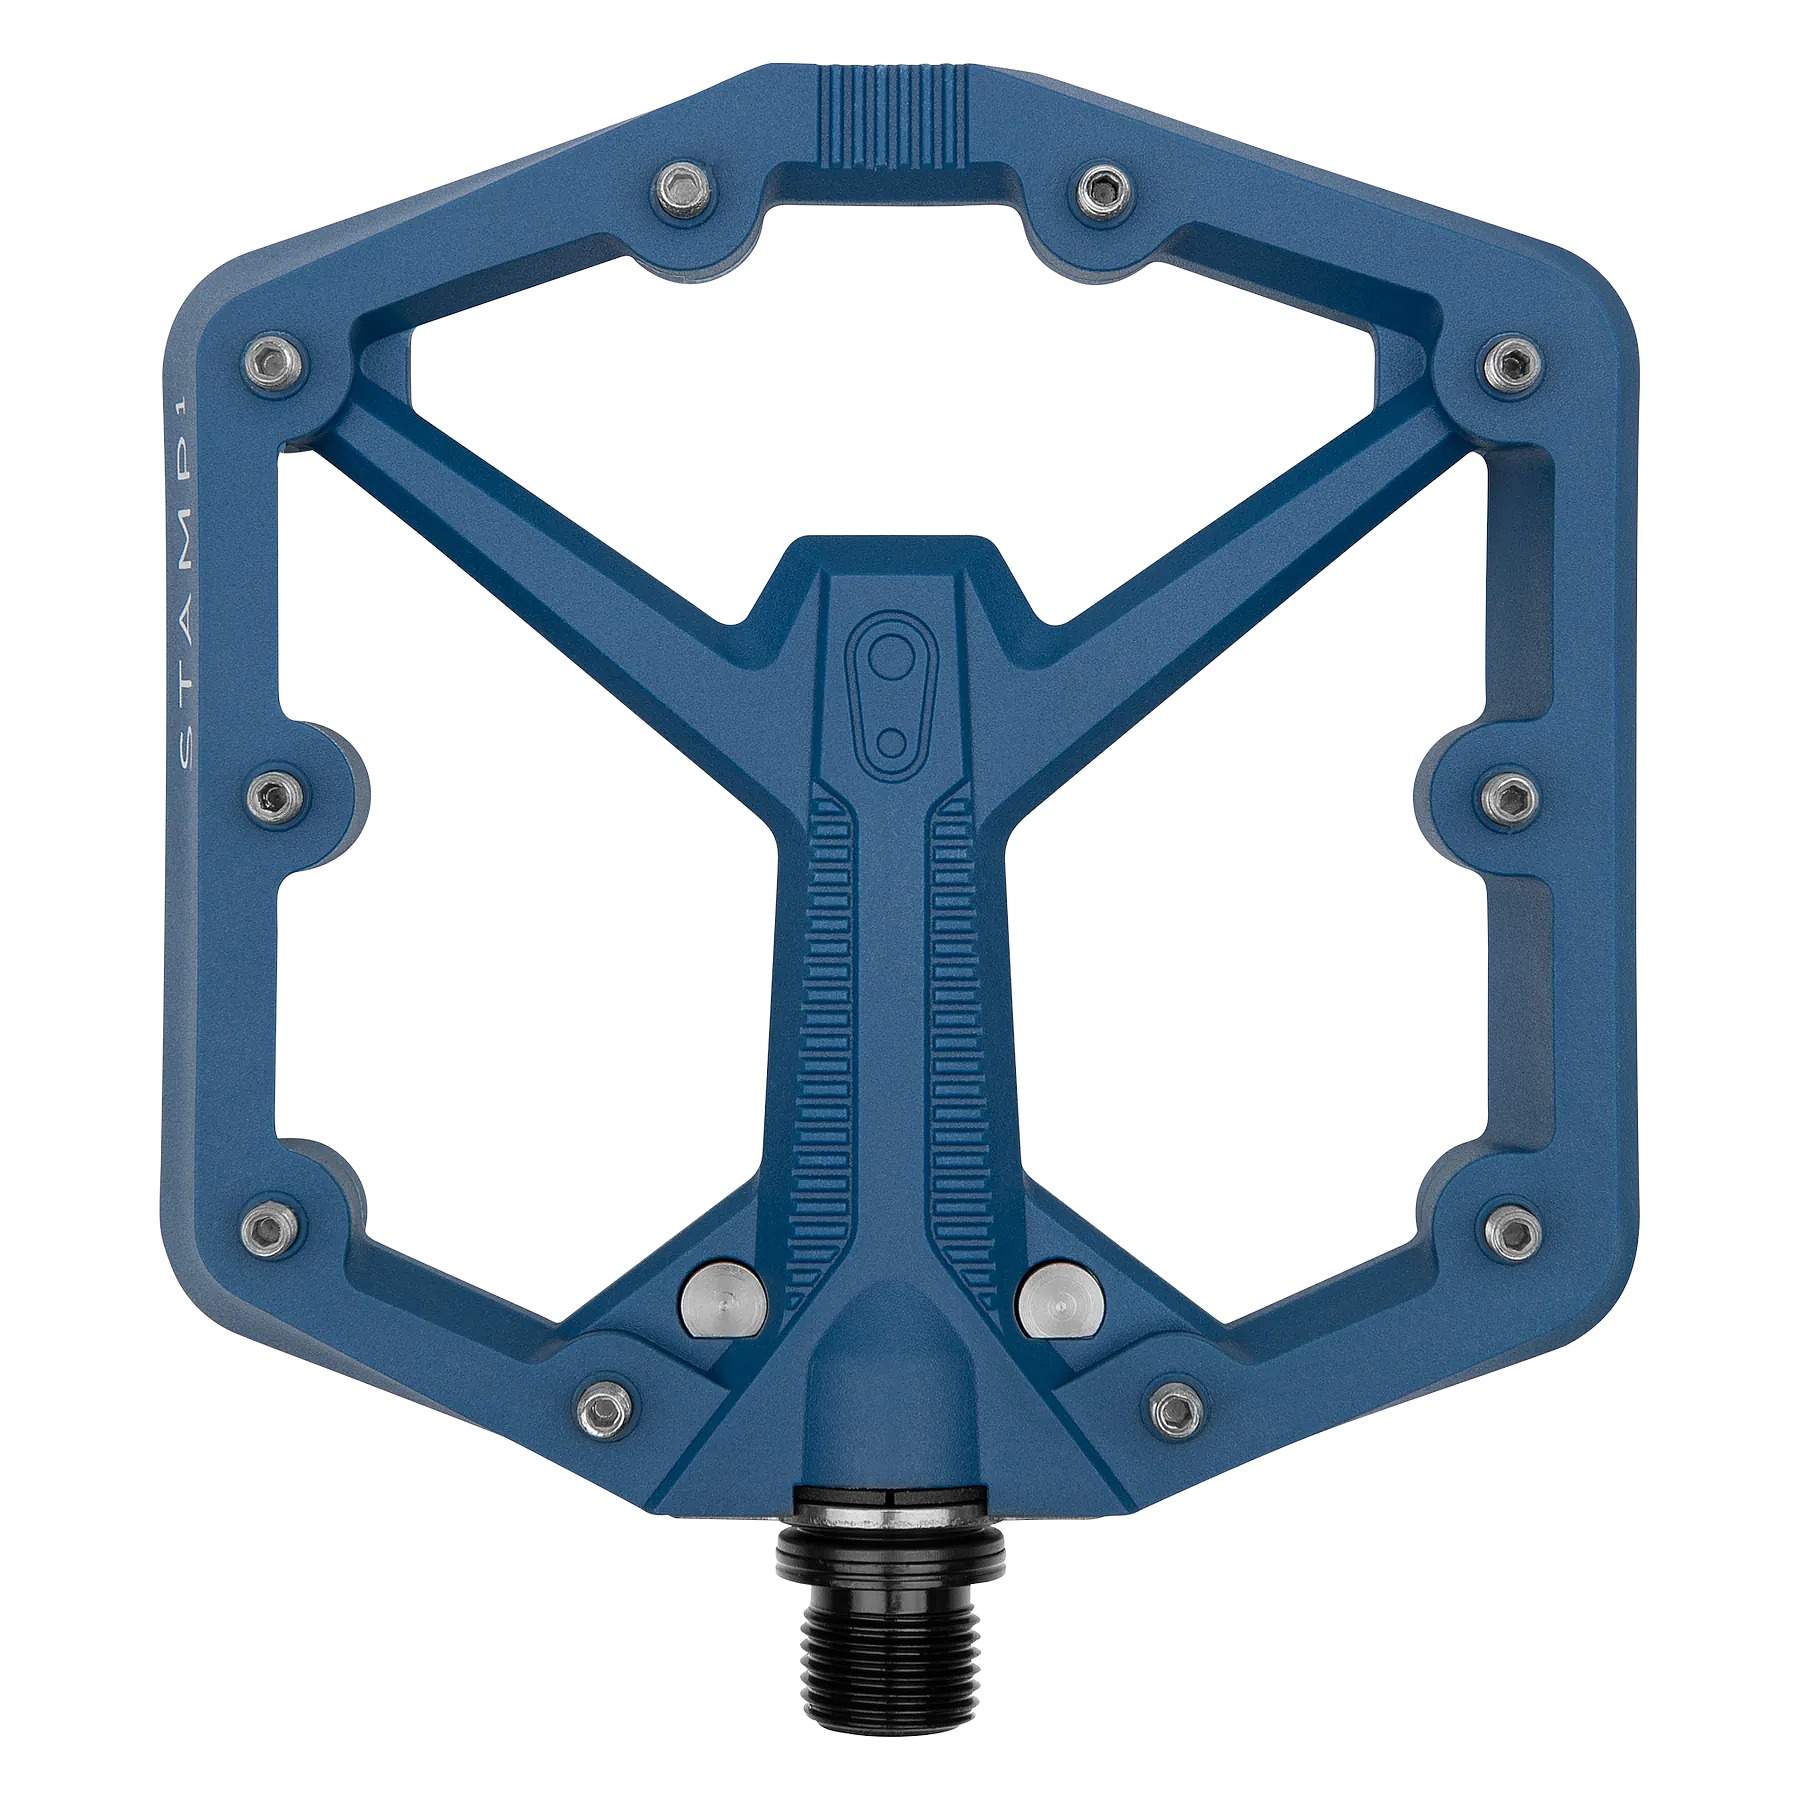 Picture of Crankbrothers Stamp 1 Gen.2 Large - Flat Pedal - navy blue